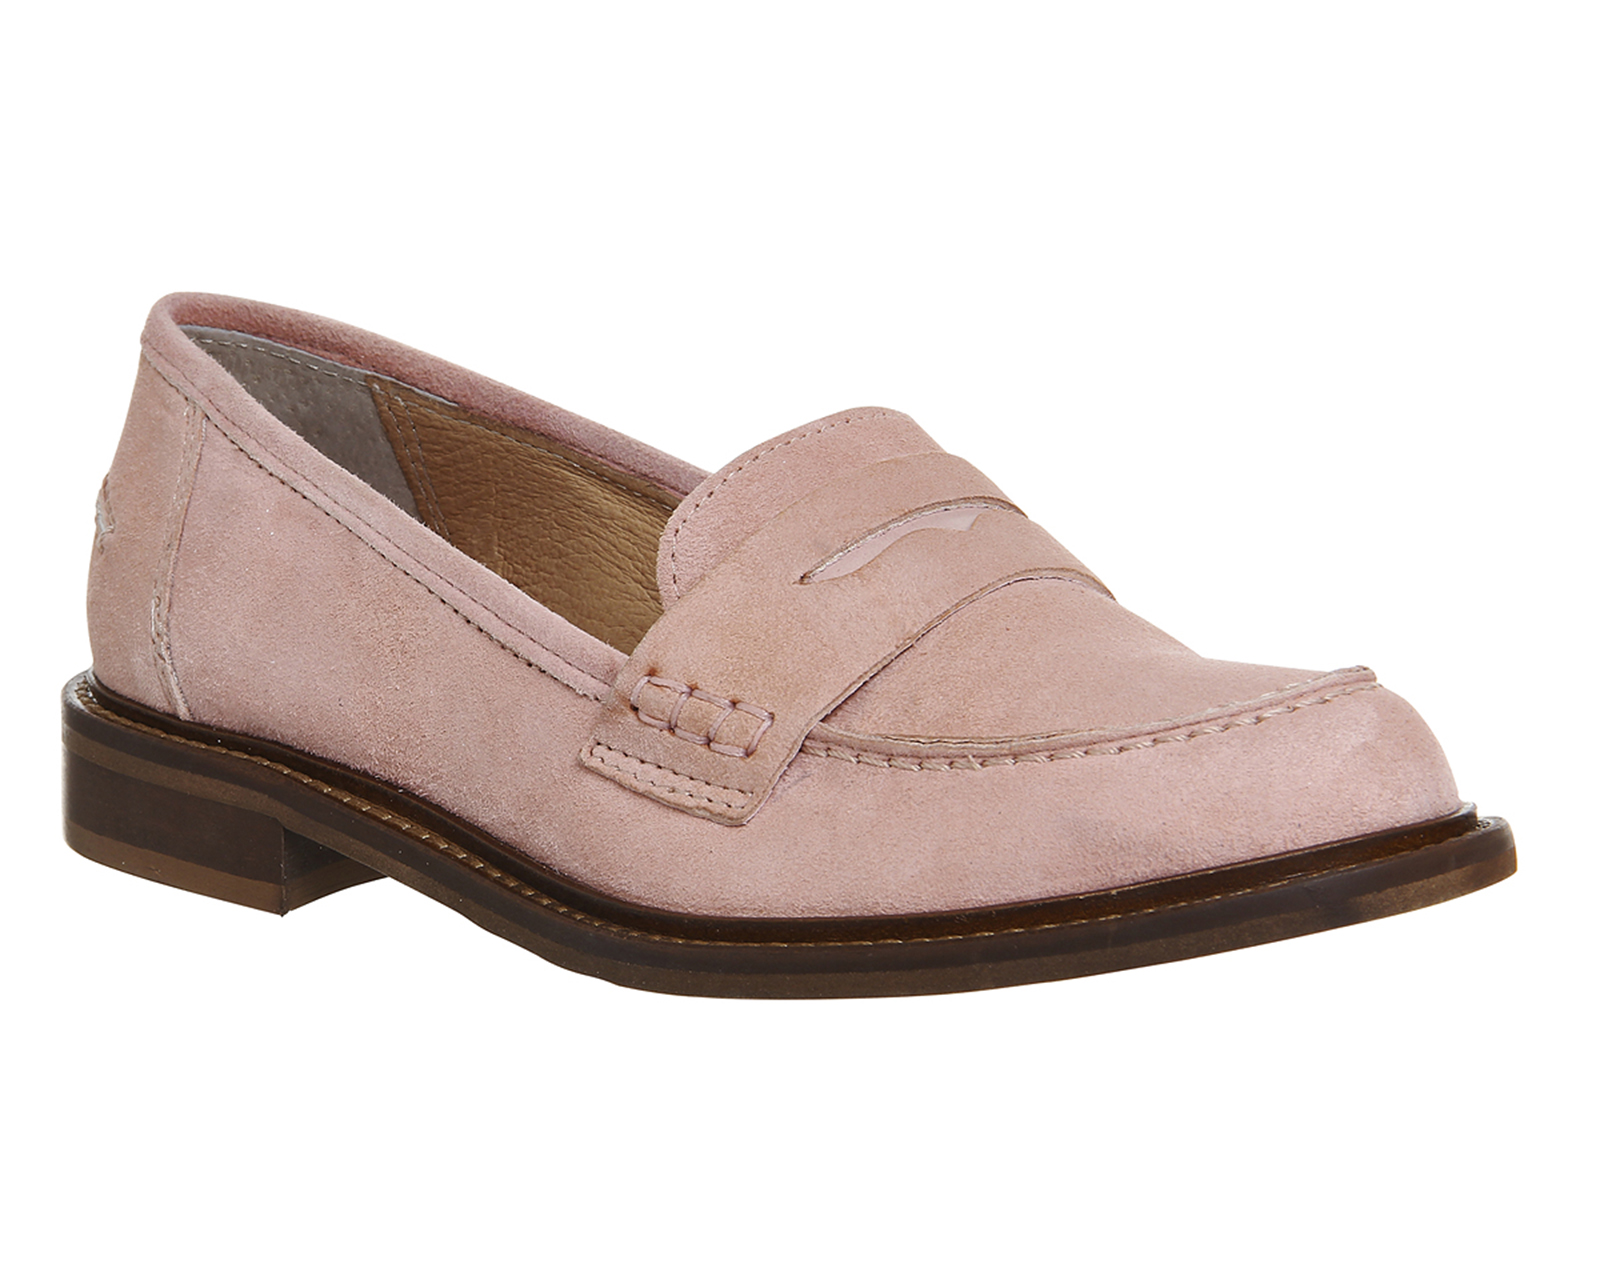 OFFICEDemanding Softy Loafer With Thick RandPink Kid Suede